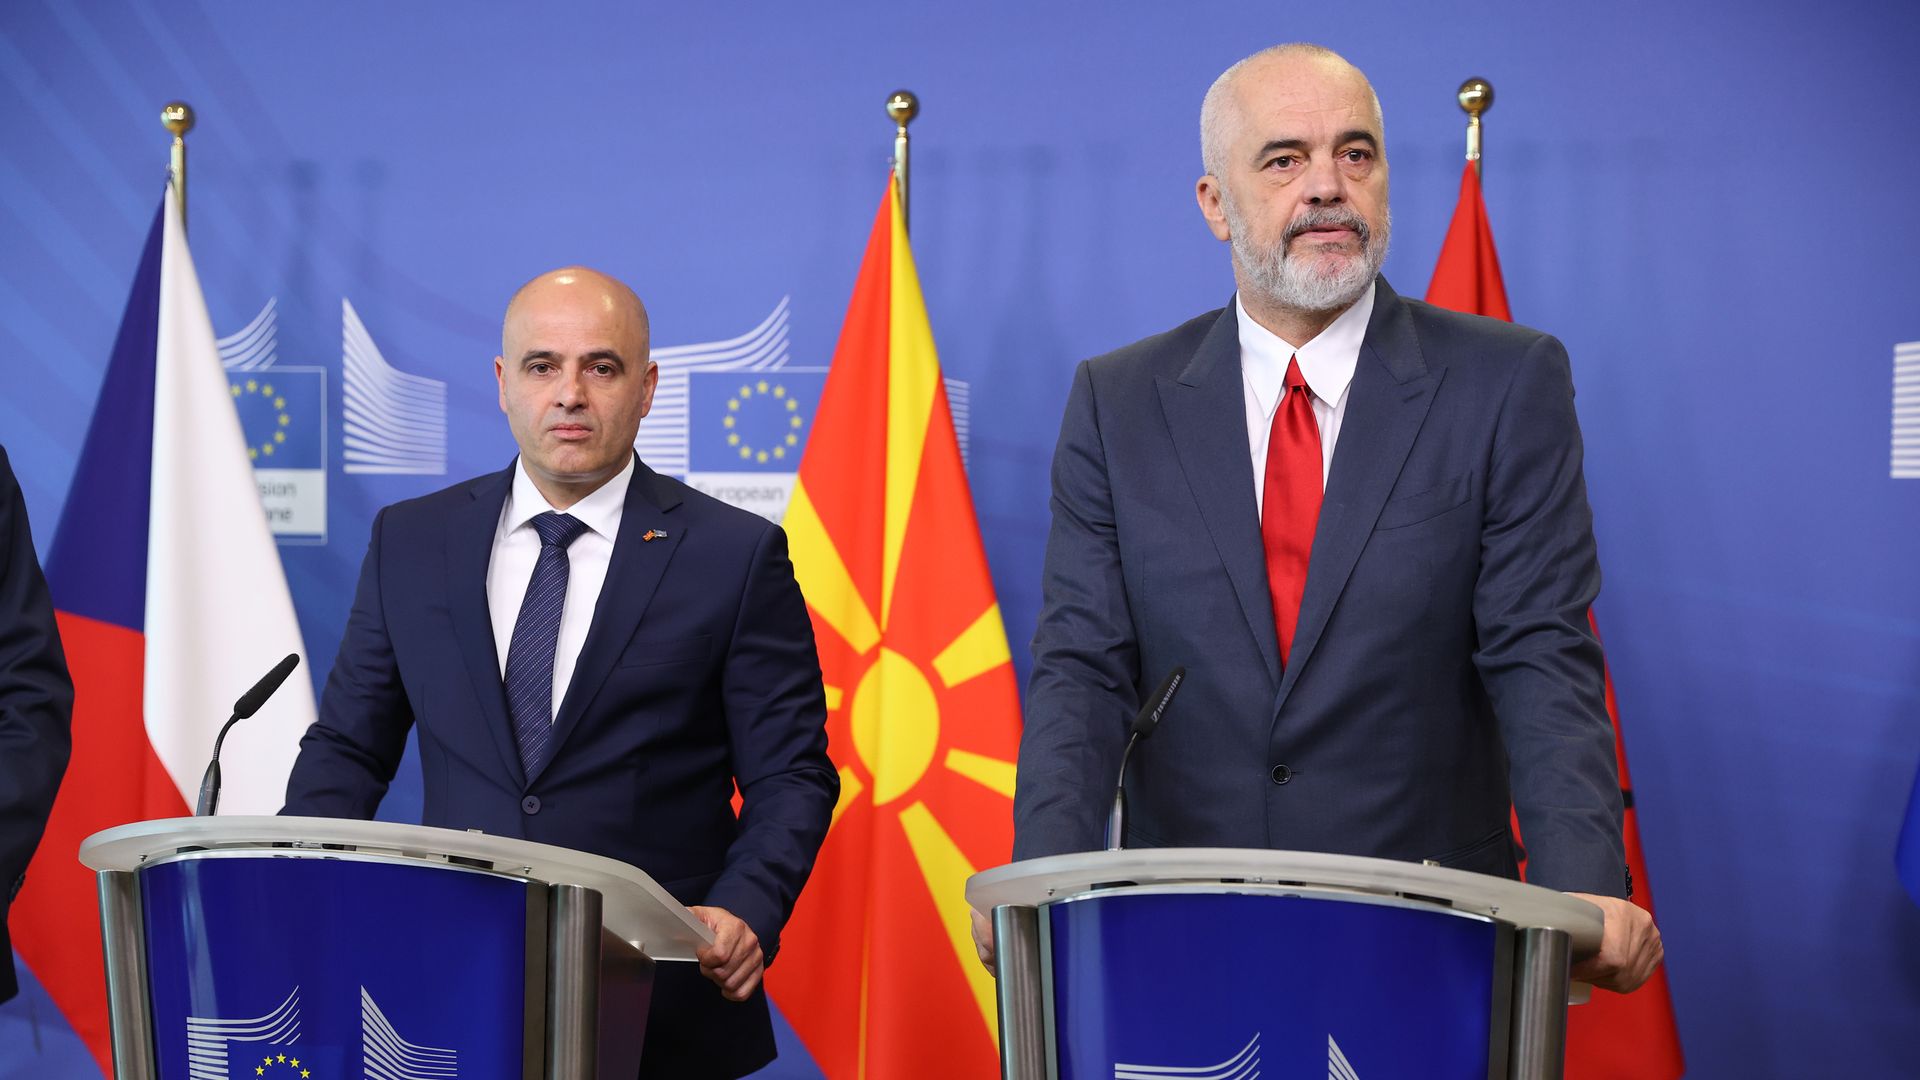 Albanian Prime Minister Edi Rama (R) and North Macedonia Prime Minister Dimitar Kovacevski (L) hold a joint press conference 